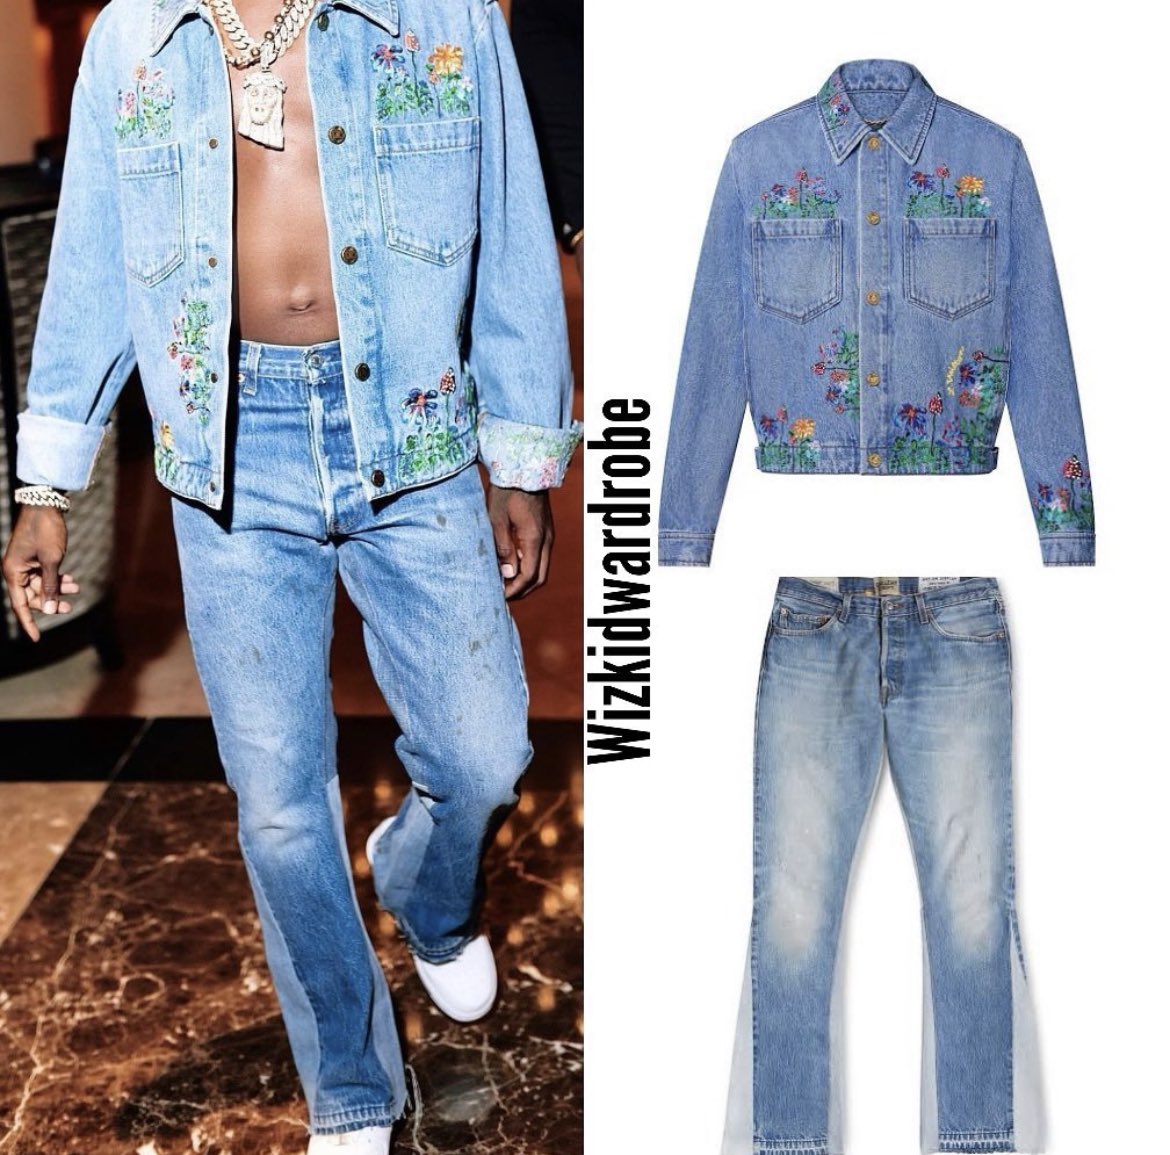 Louis Vuitton Denim Streetwear outfit, Gallery posted by Ludjero